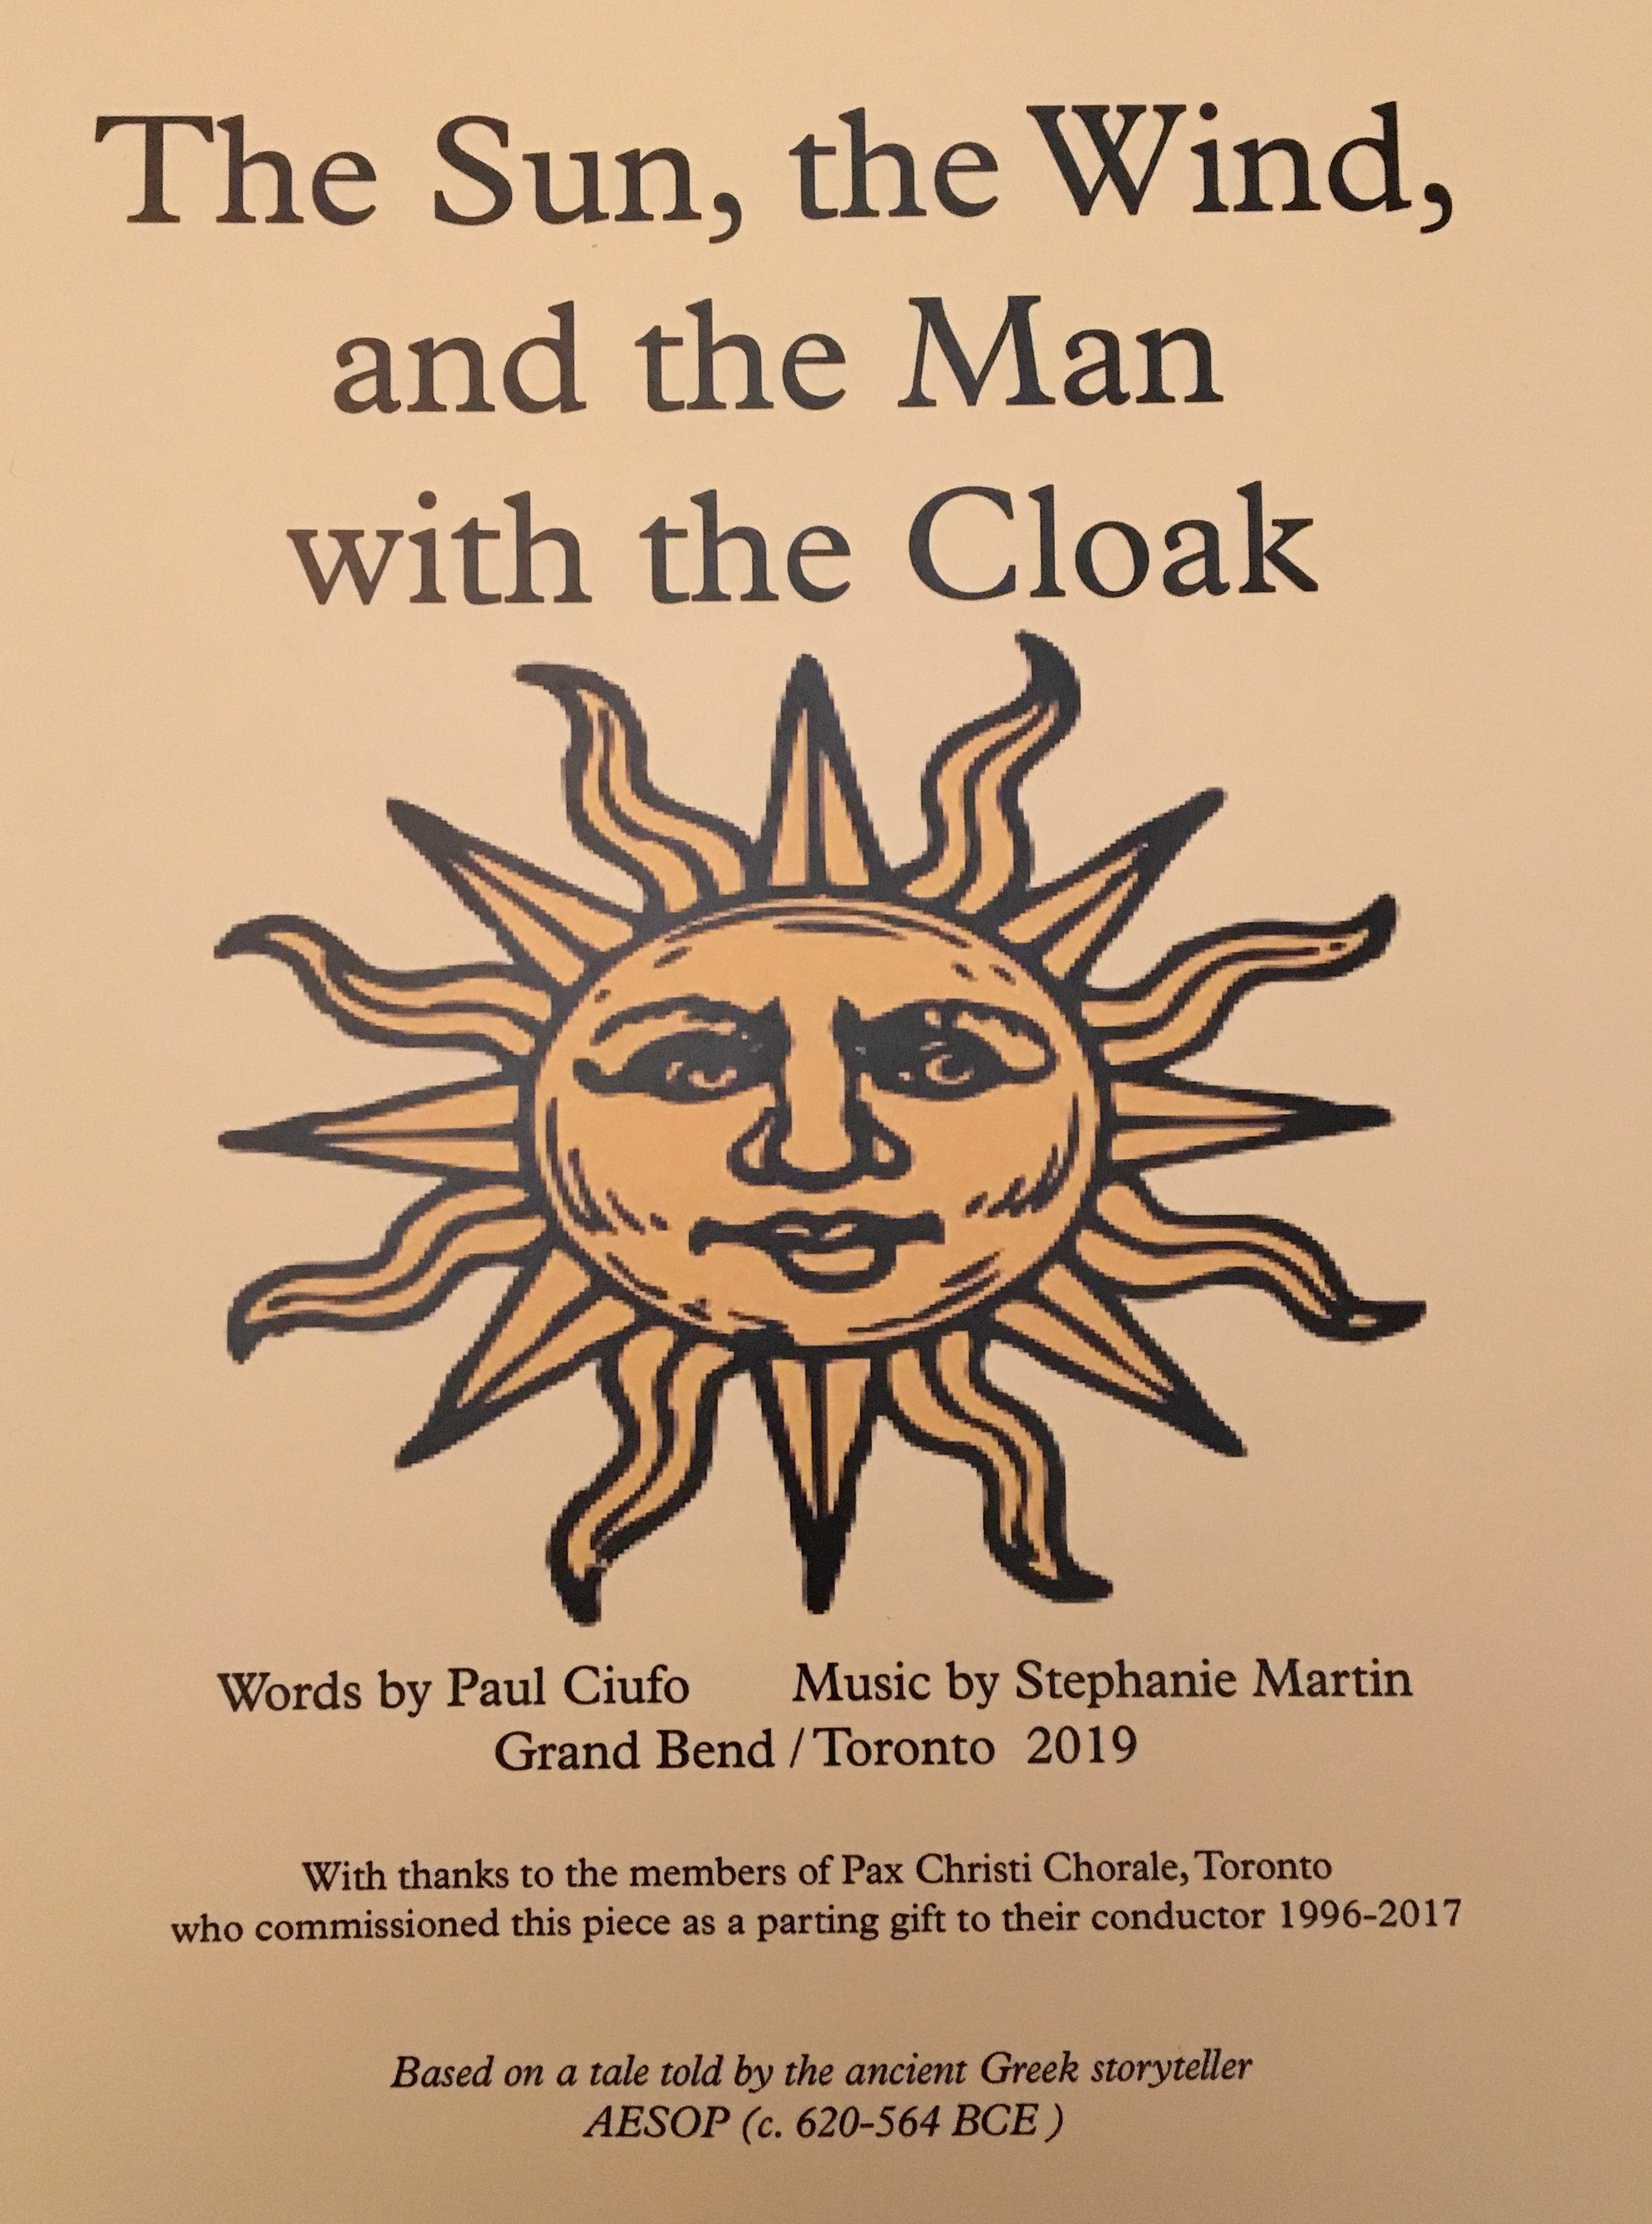 The sun, the wind and the Man With the Cloak